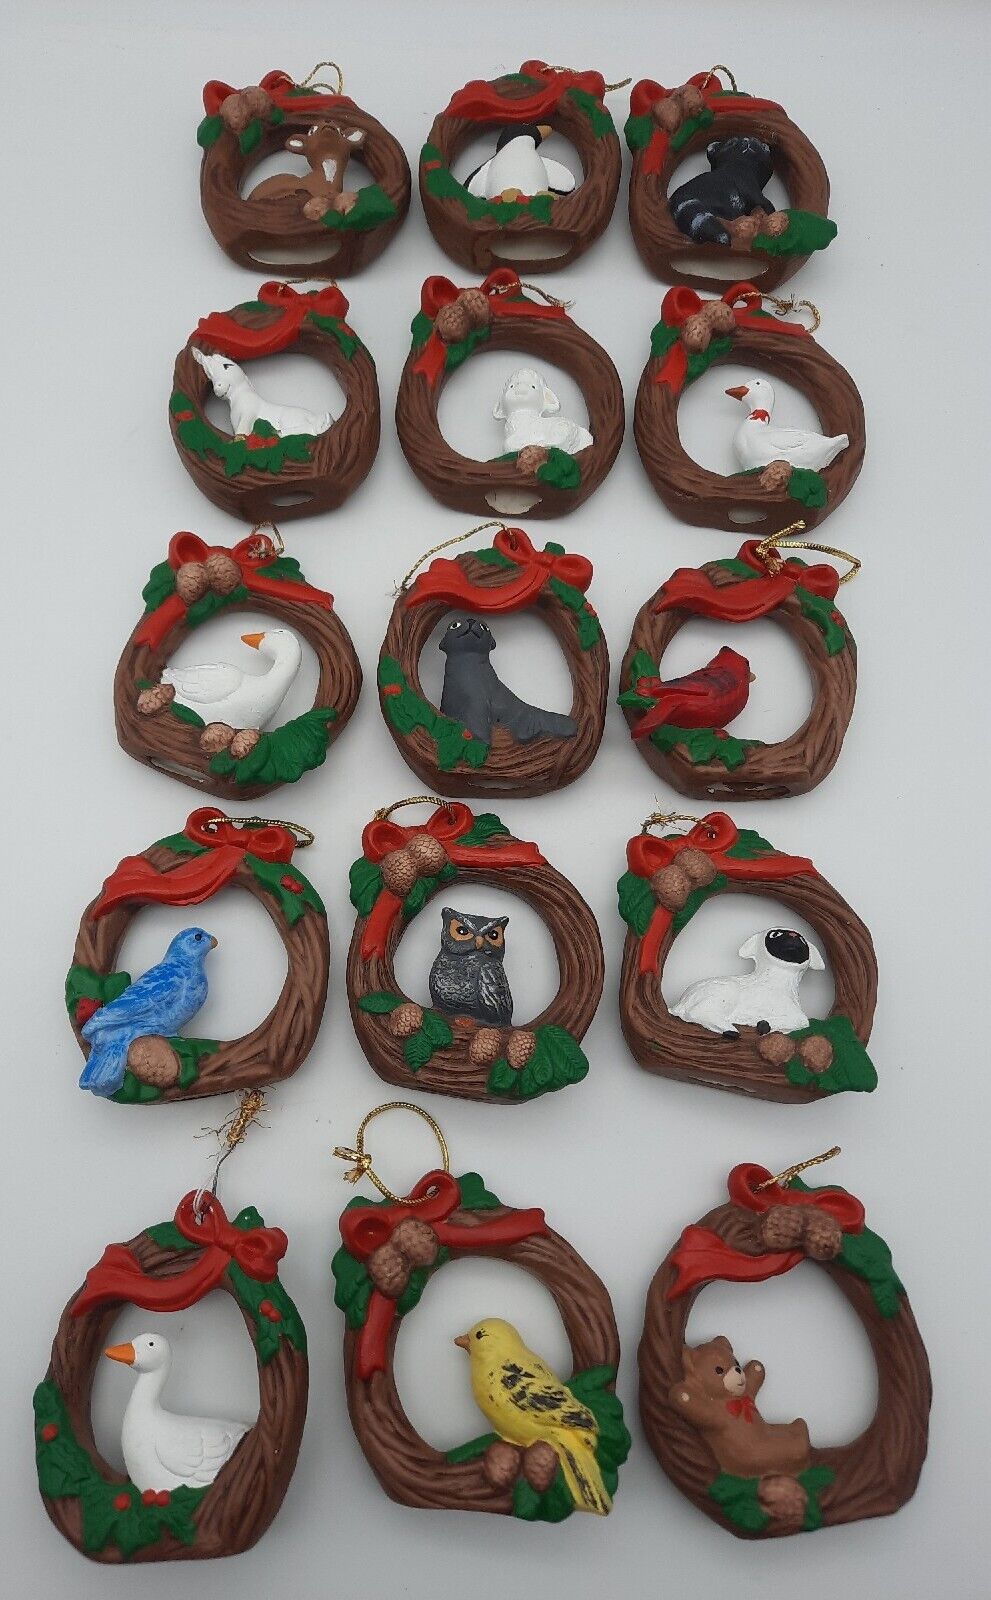 Lot of 15 Vintage Wreath Christmas Ornaments w/ Animals Ceramic Painted